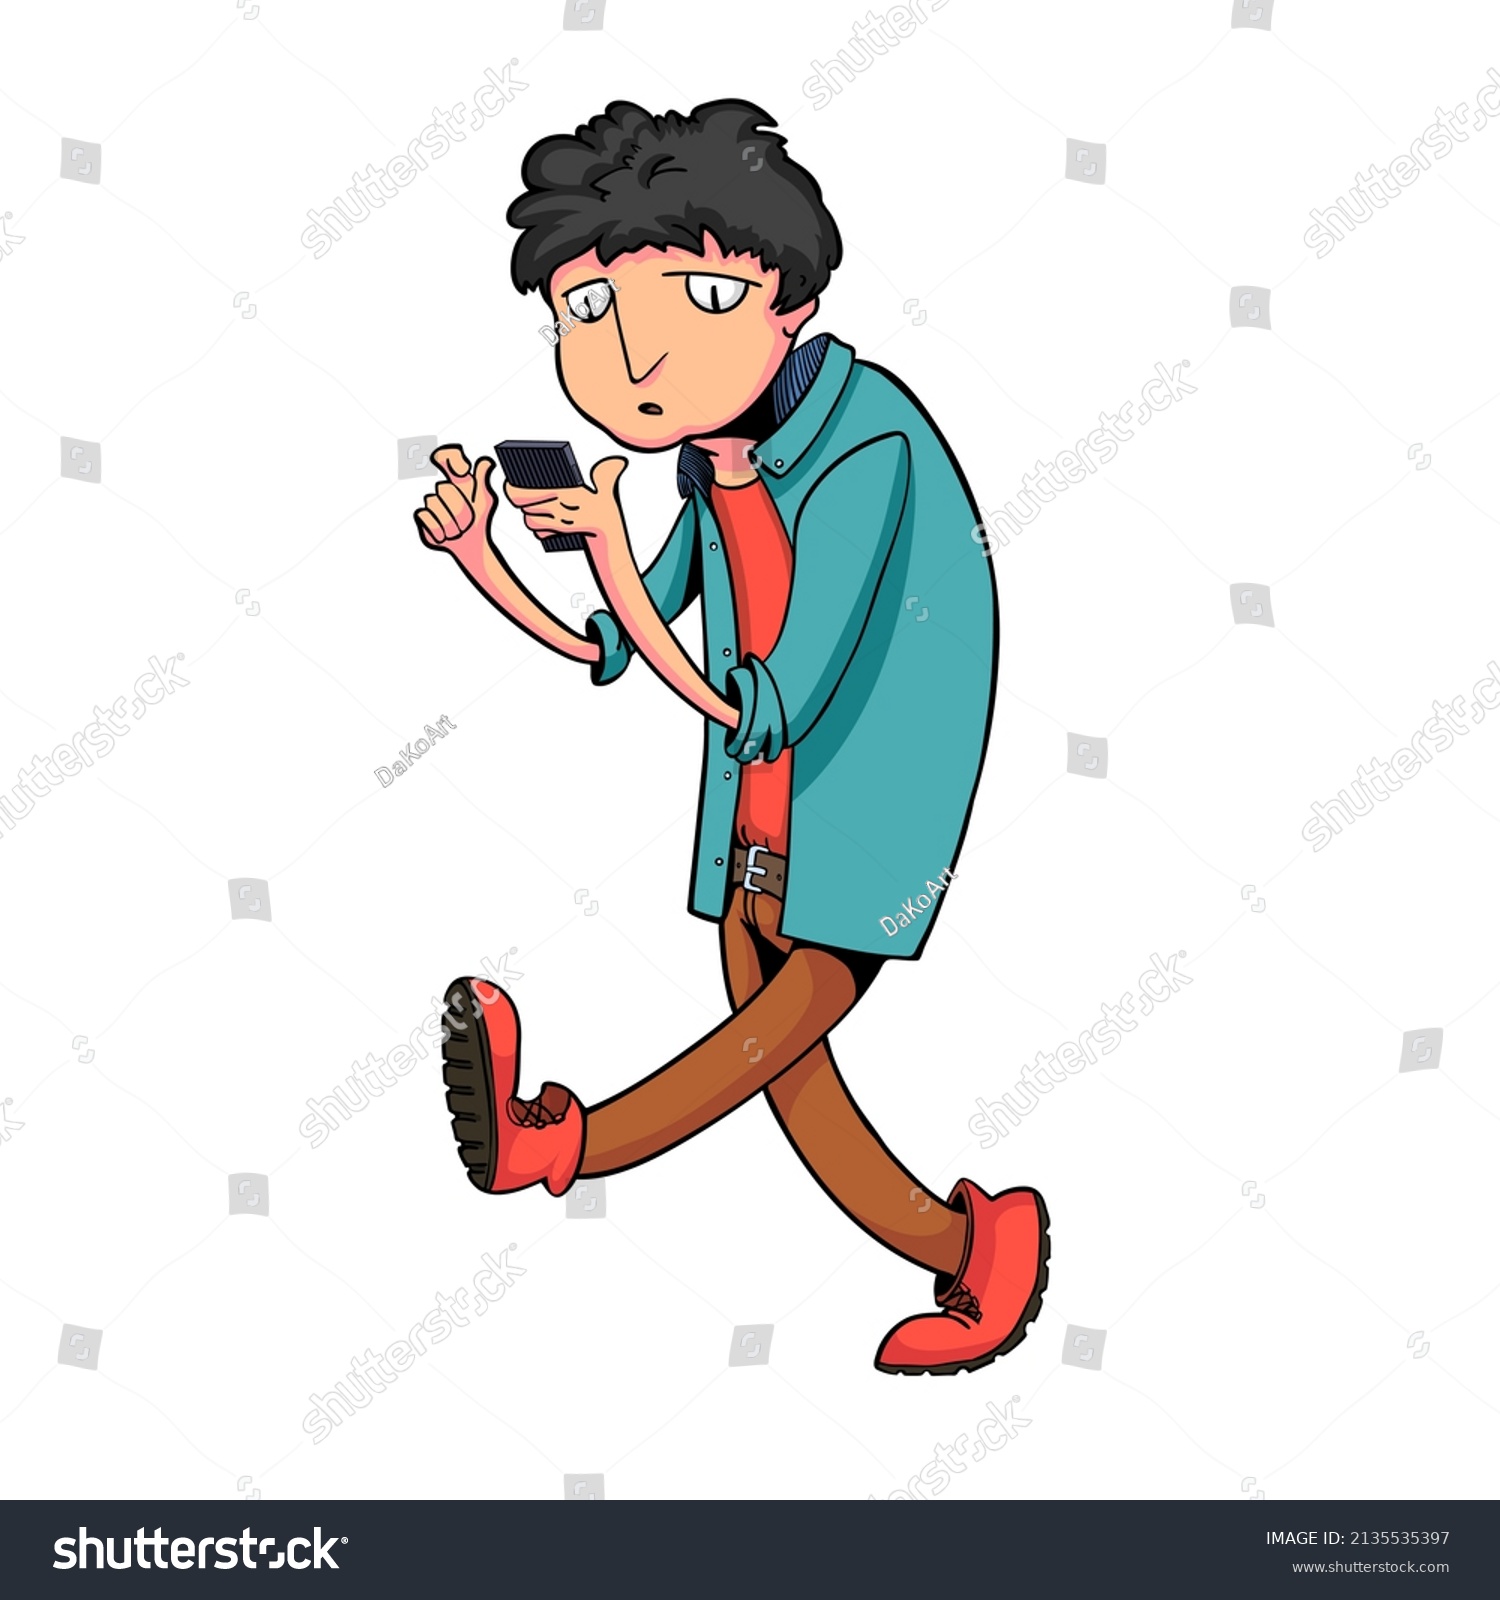 SVG of Hand-drawn cartoon guy with a phone on an isolated background svg